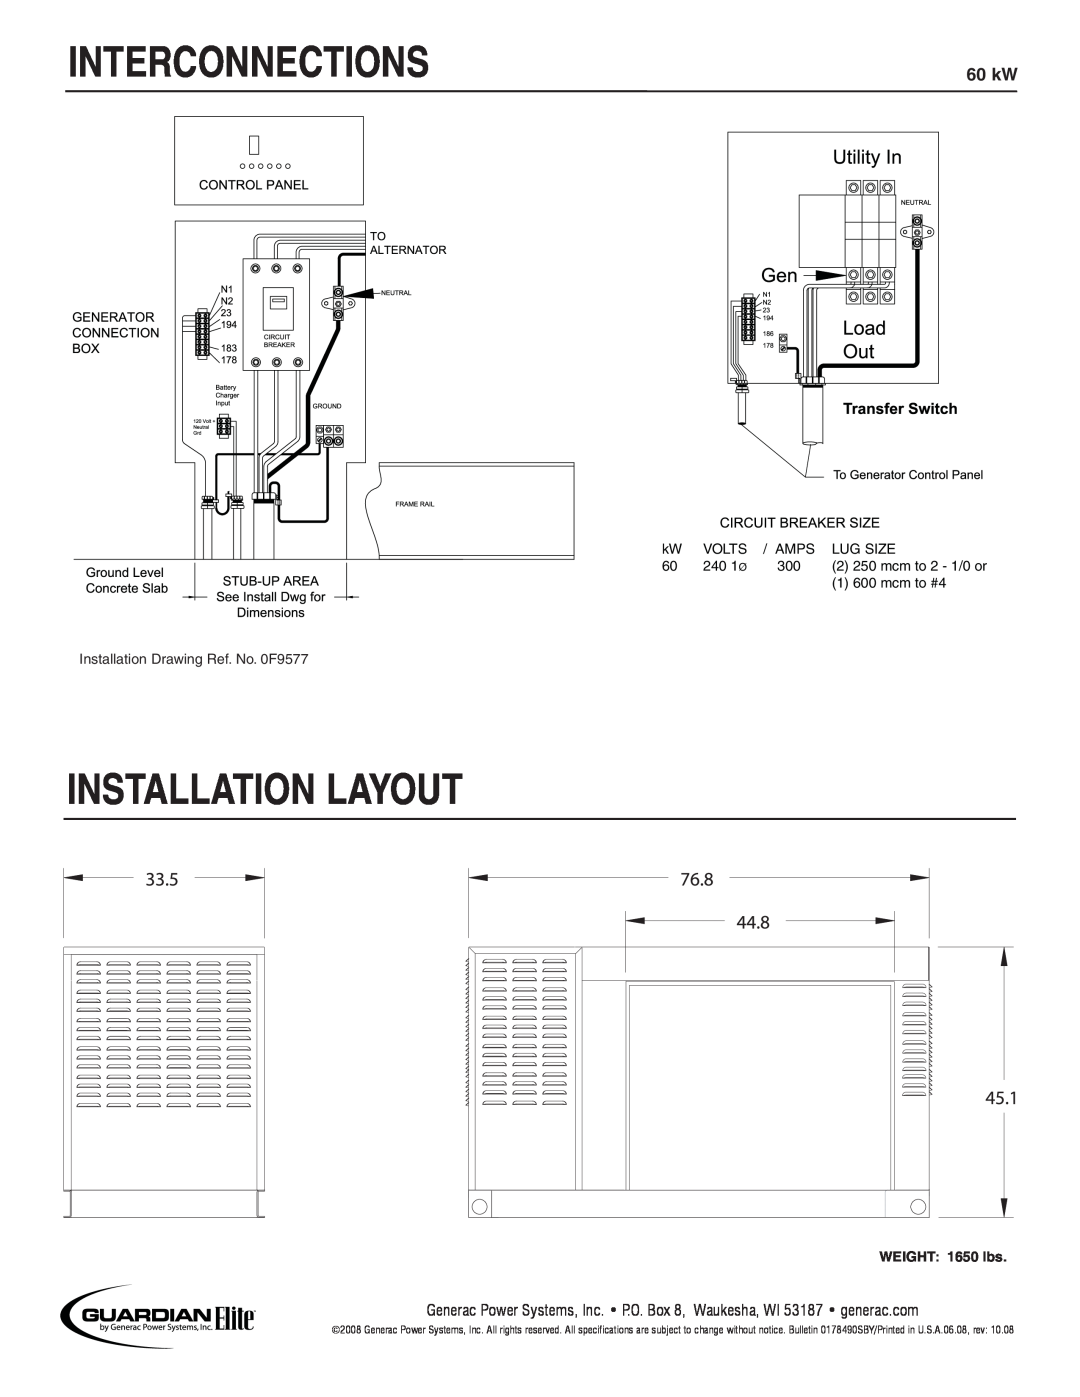 Guardian Technologies 05649 manual Interconnections, Installation Layout, 60 kW, WEIGHT 1650 lbs 